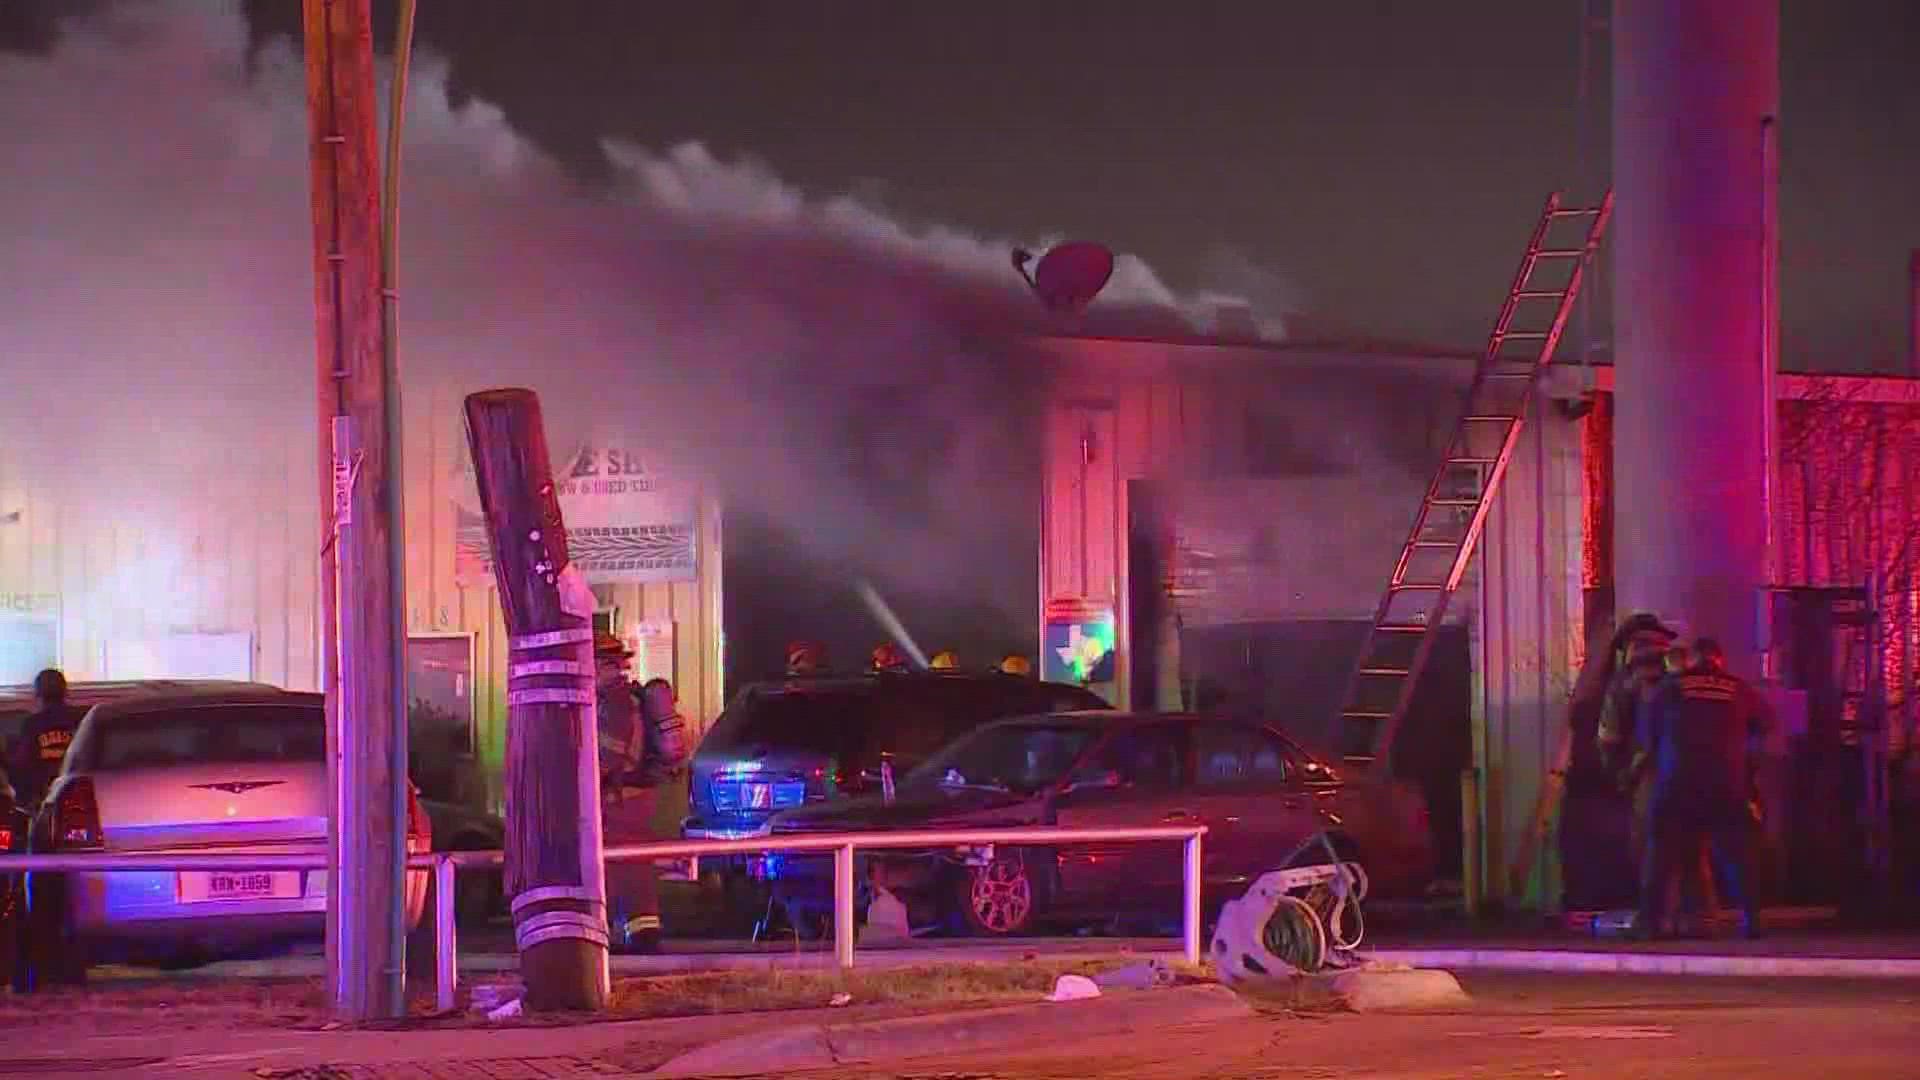 Wednesday morning, a fire broke out at an auto repair business near I-35 and Ledbetter in Dallas.